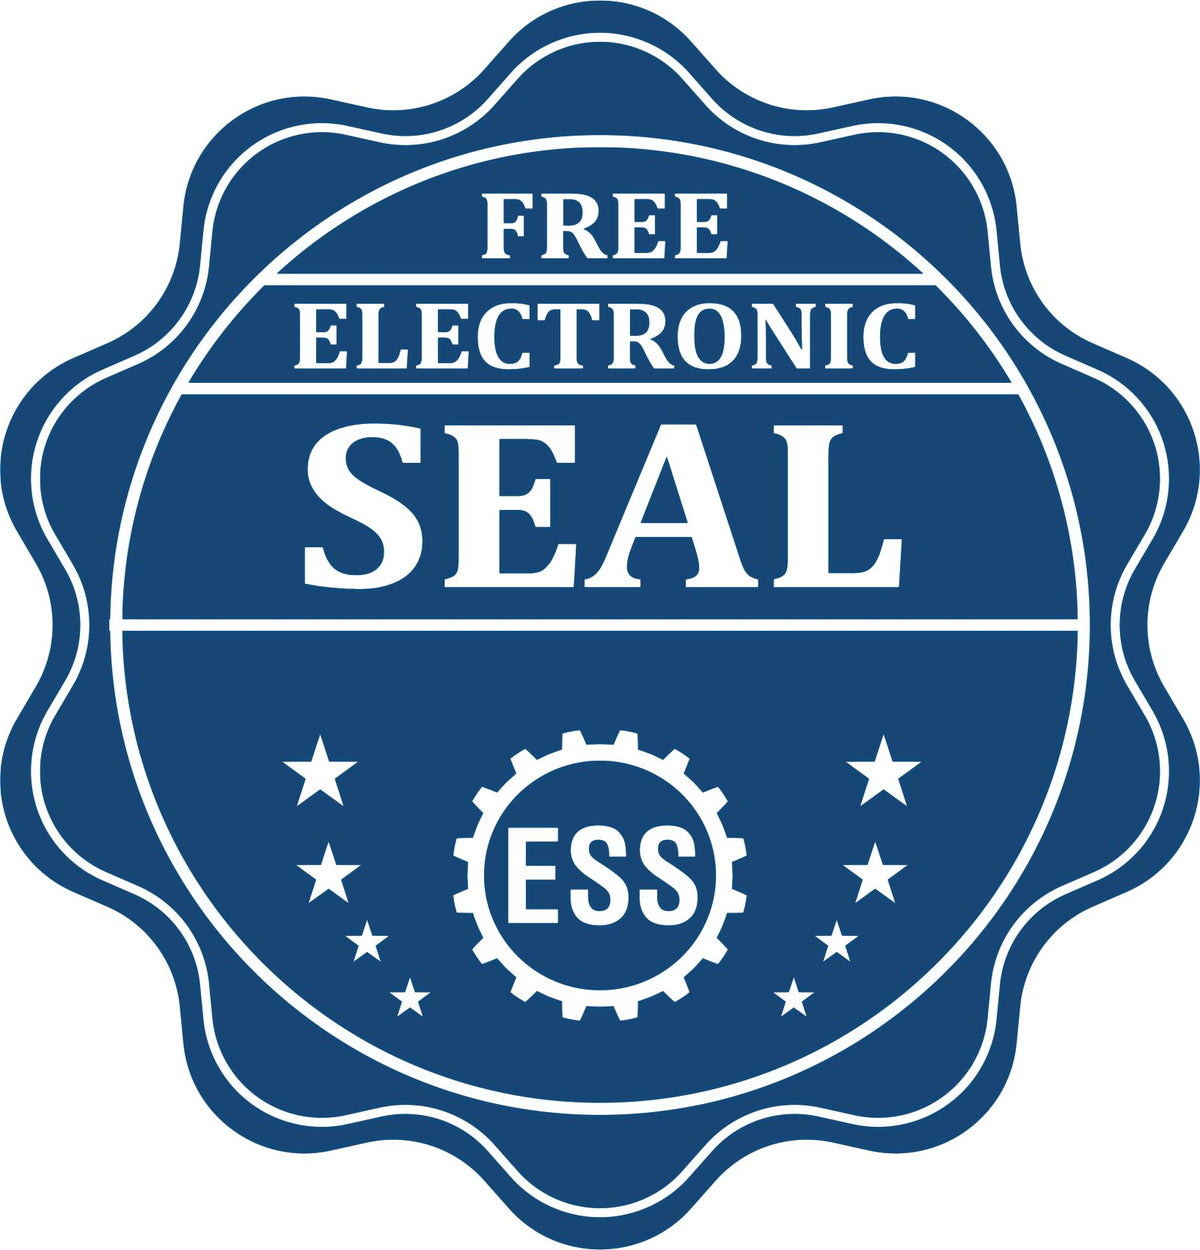 A badge showing a free electronic seal for the Heavy Duty Cast Iron Arizona Architect Embosser with stars and the ESS gear on the emblem.